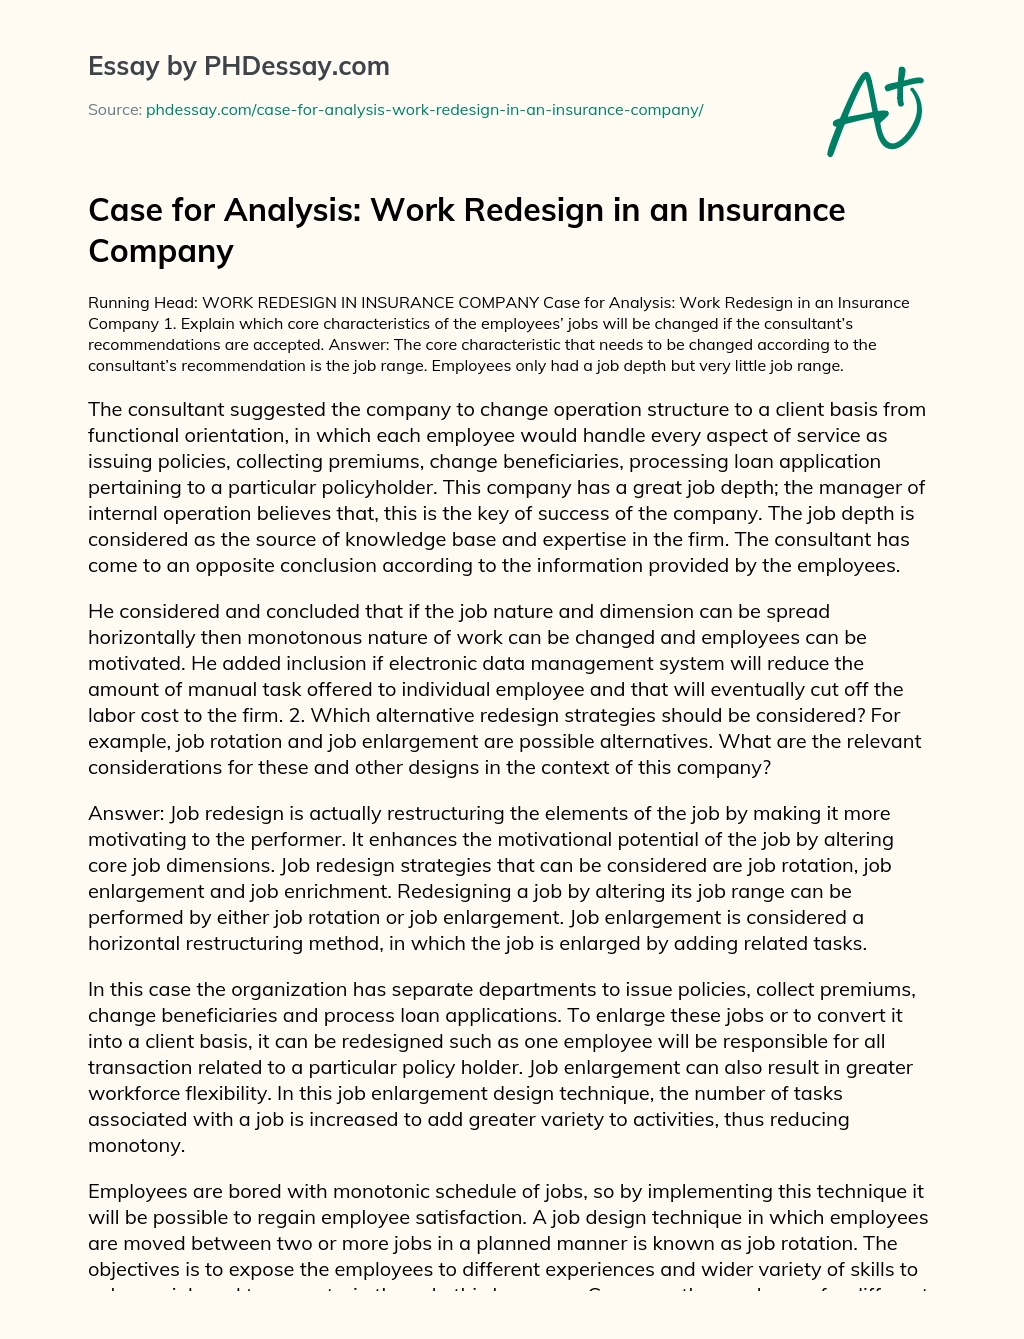 Case for Analysis: Work Redesign in an Insurance Company essay